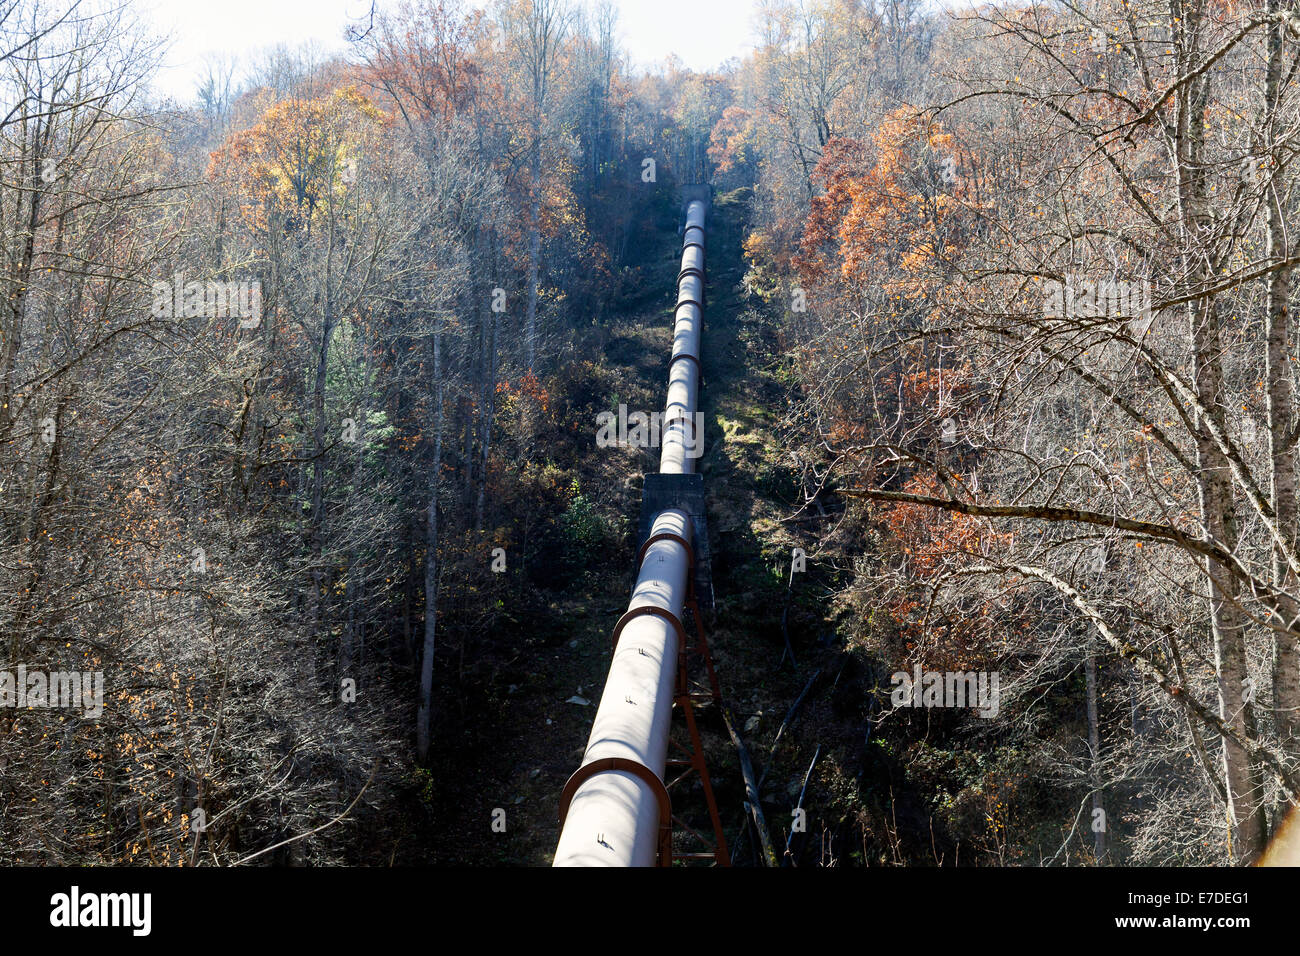 Water supply aqueduct in the mountains near Glenville, North Carolina along scenic highway NC 107, USA. Stock Photo